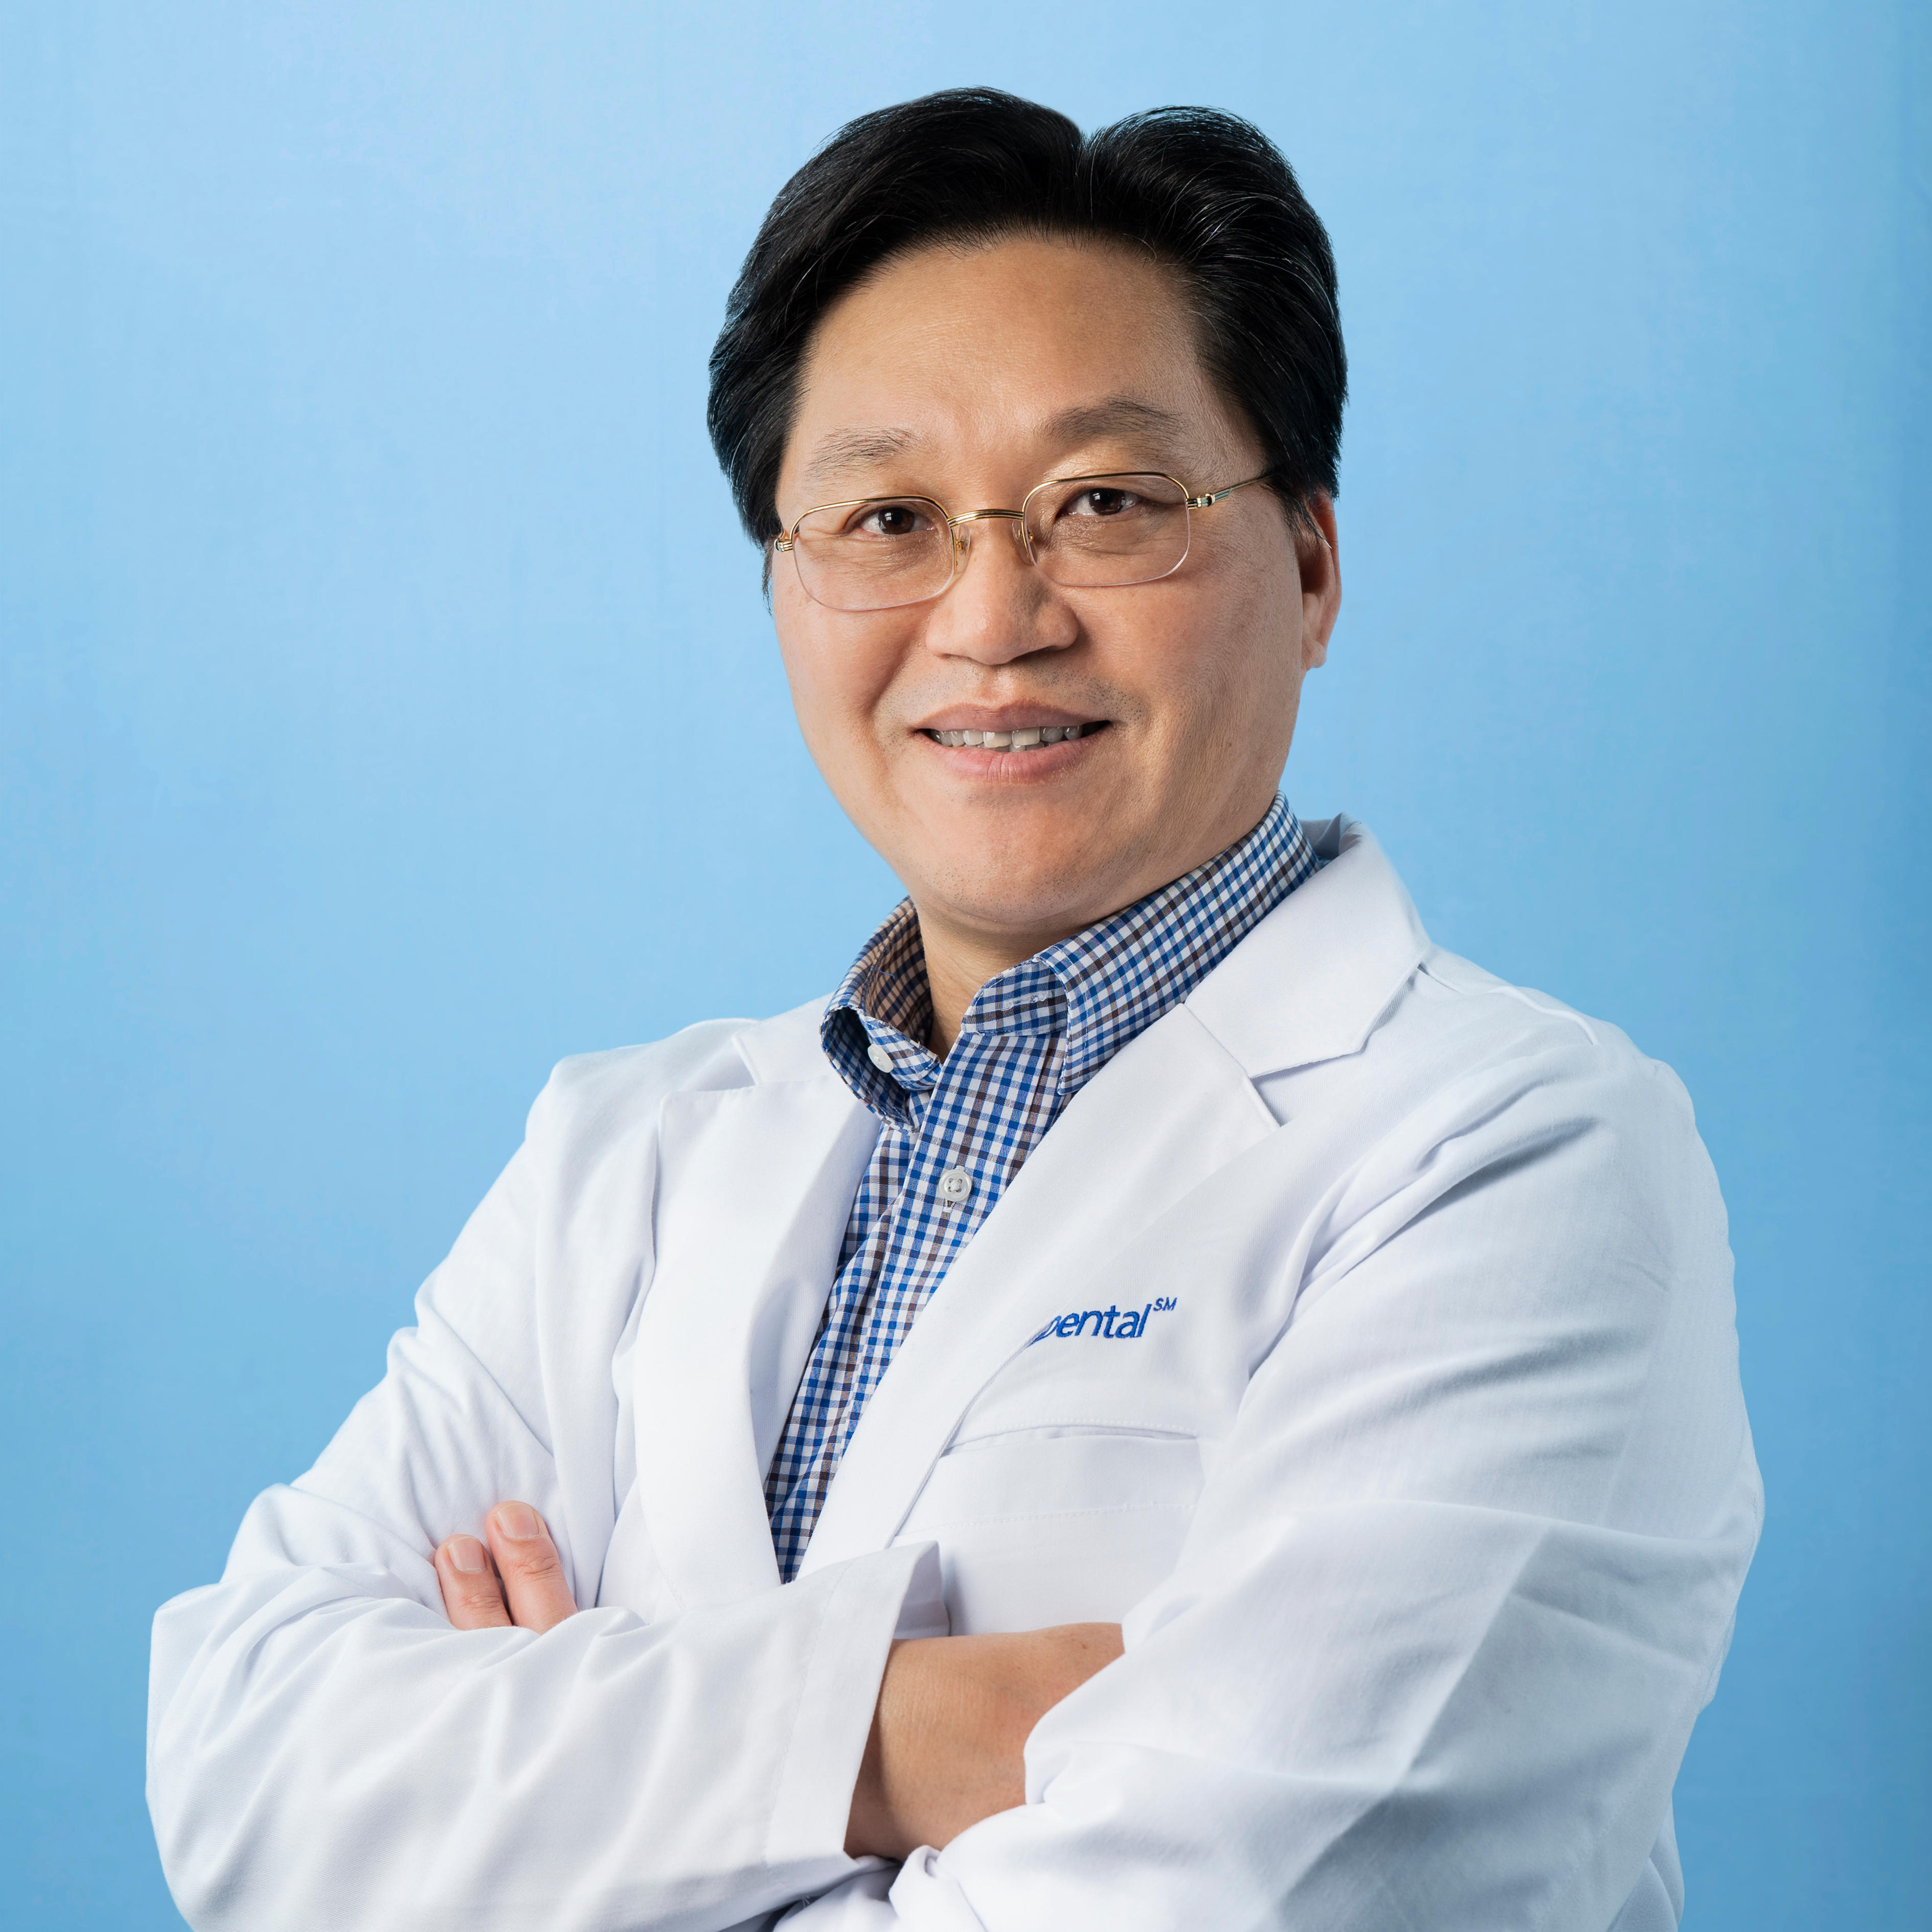 Dr. Young Park, DMD